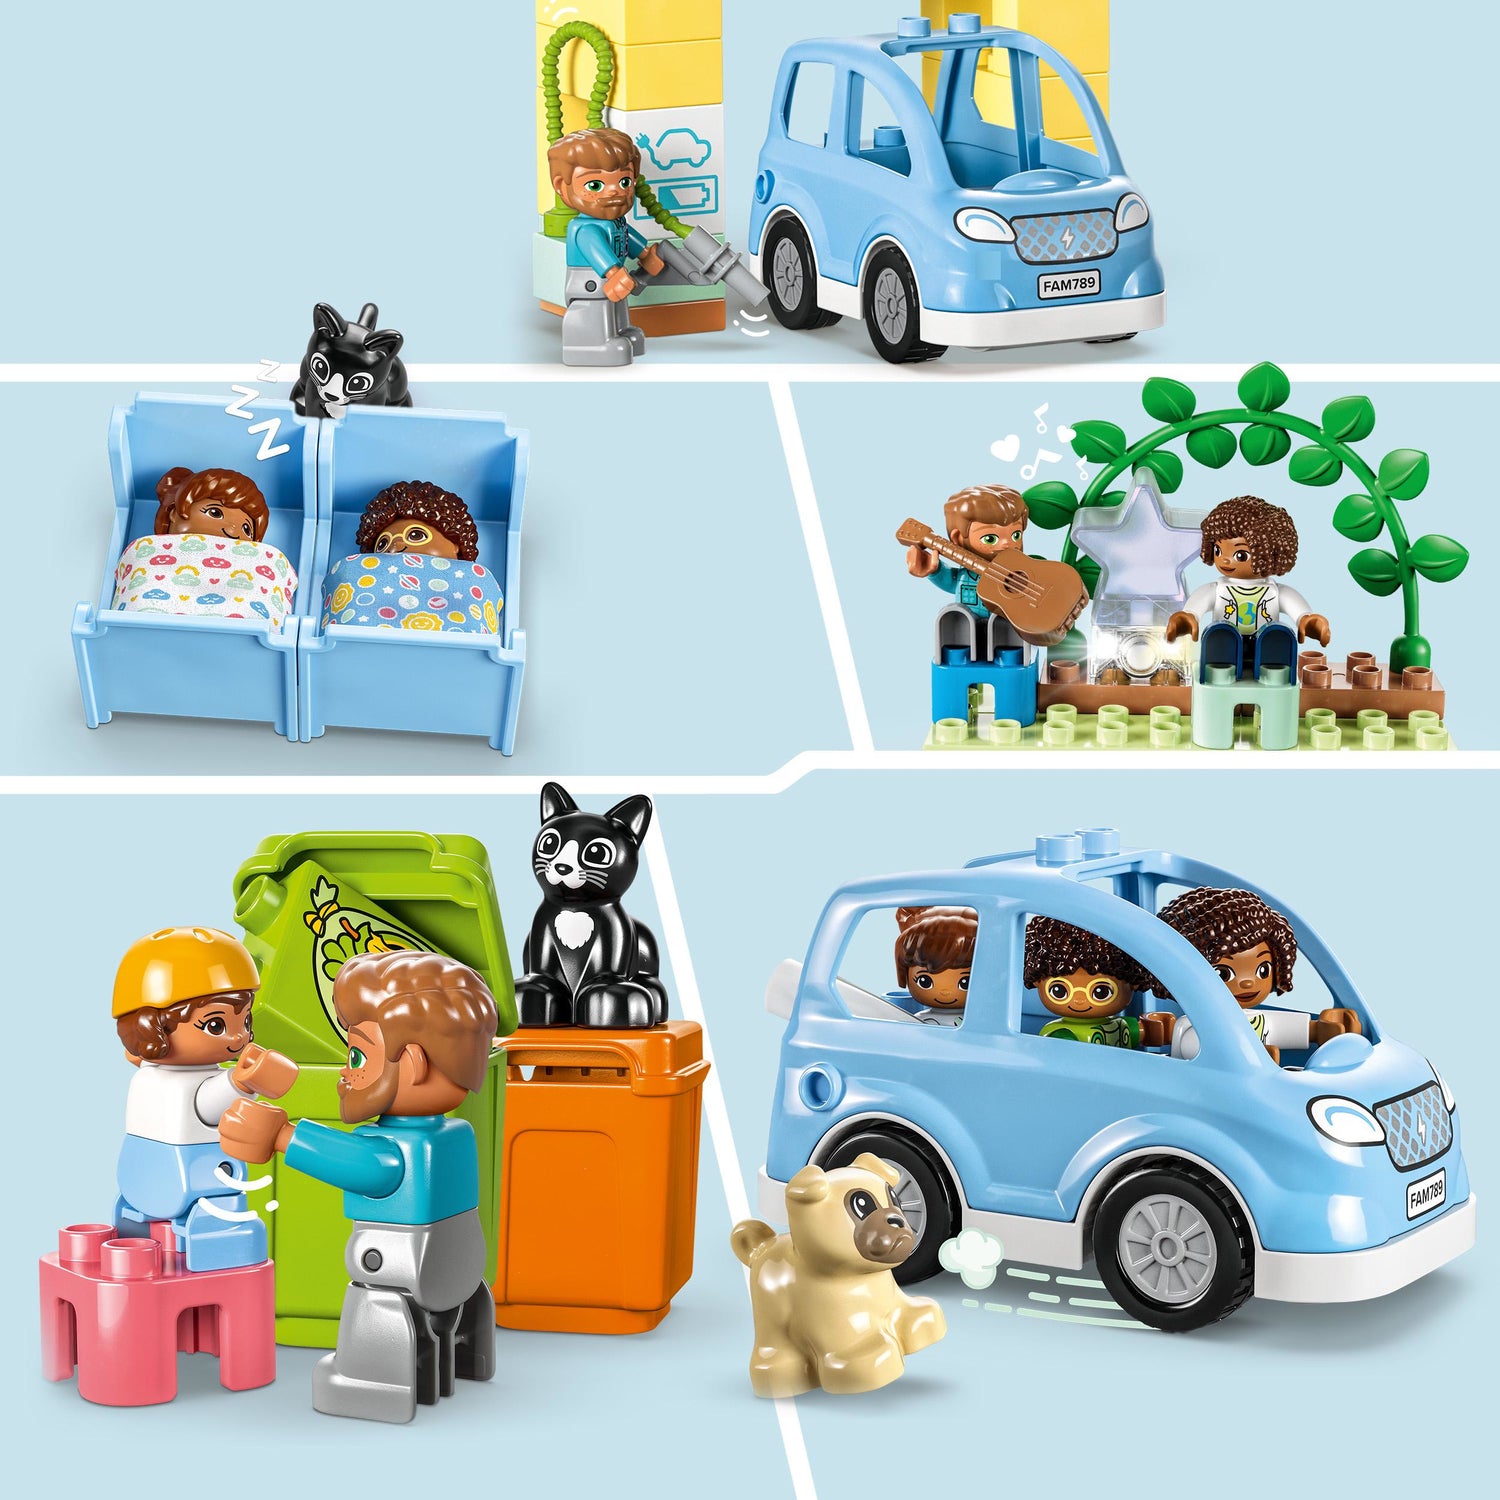 LEGO® DUPLO 3 in 1 Family House Set with Toy Car